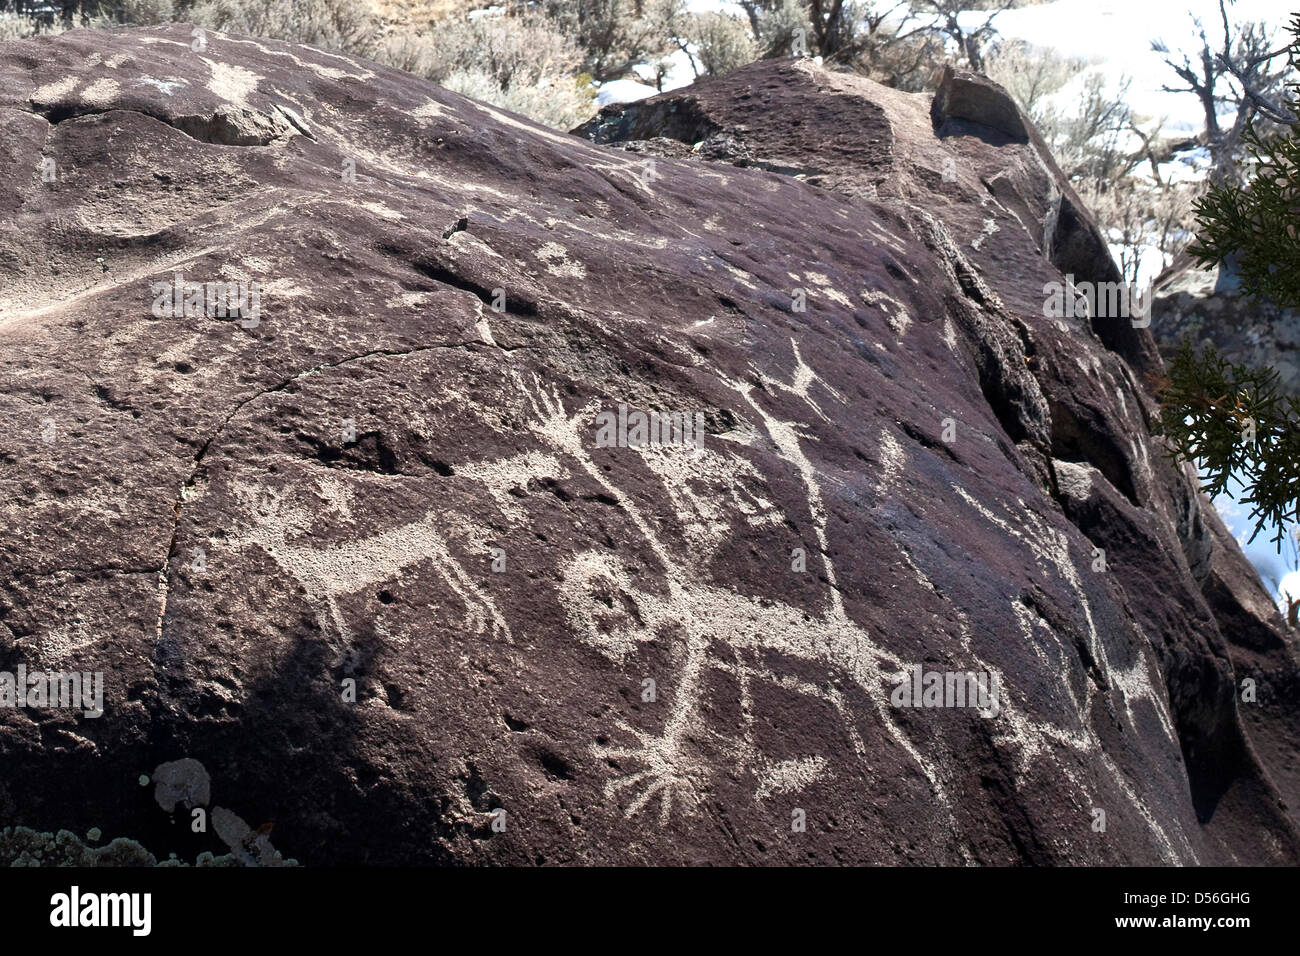 View of petroglyphs carved into rock at the Río Grande del Norte National Monument north of Taos, New Mexico near the Colorado border. The Monument includes approximately 242,500 acres of public land. President Barack Obama designated Río Grande del Norte a National Monument March 25, 2013. Stock Photo